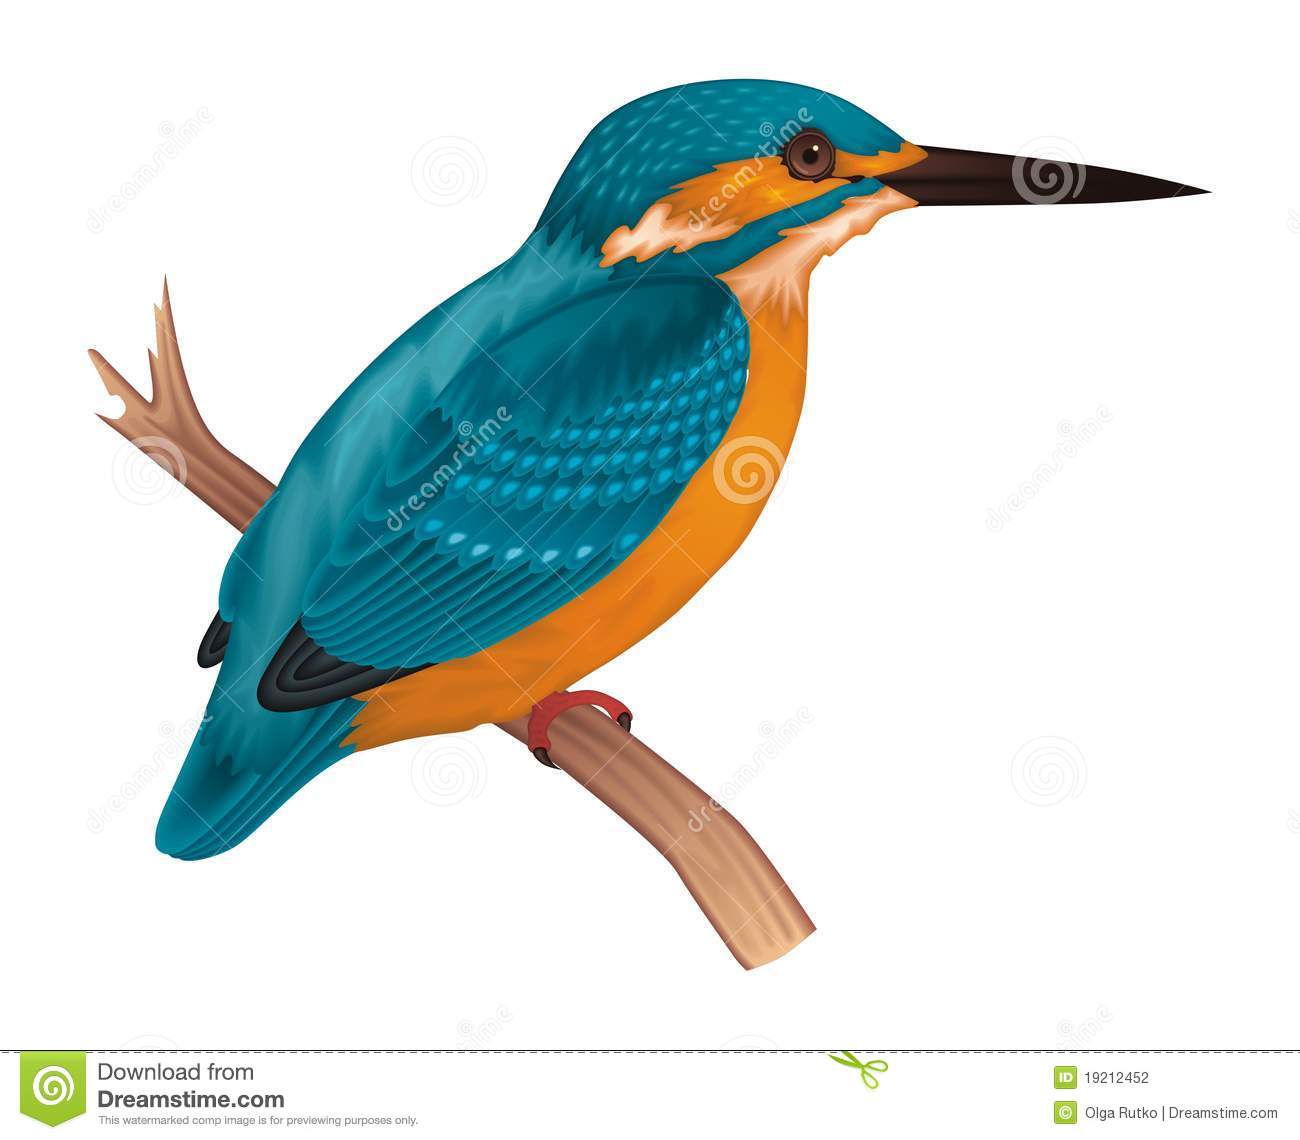 Kingfisher clipart #20, Download drawings